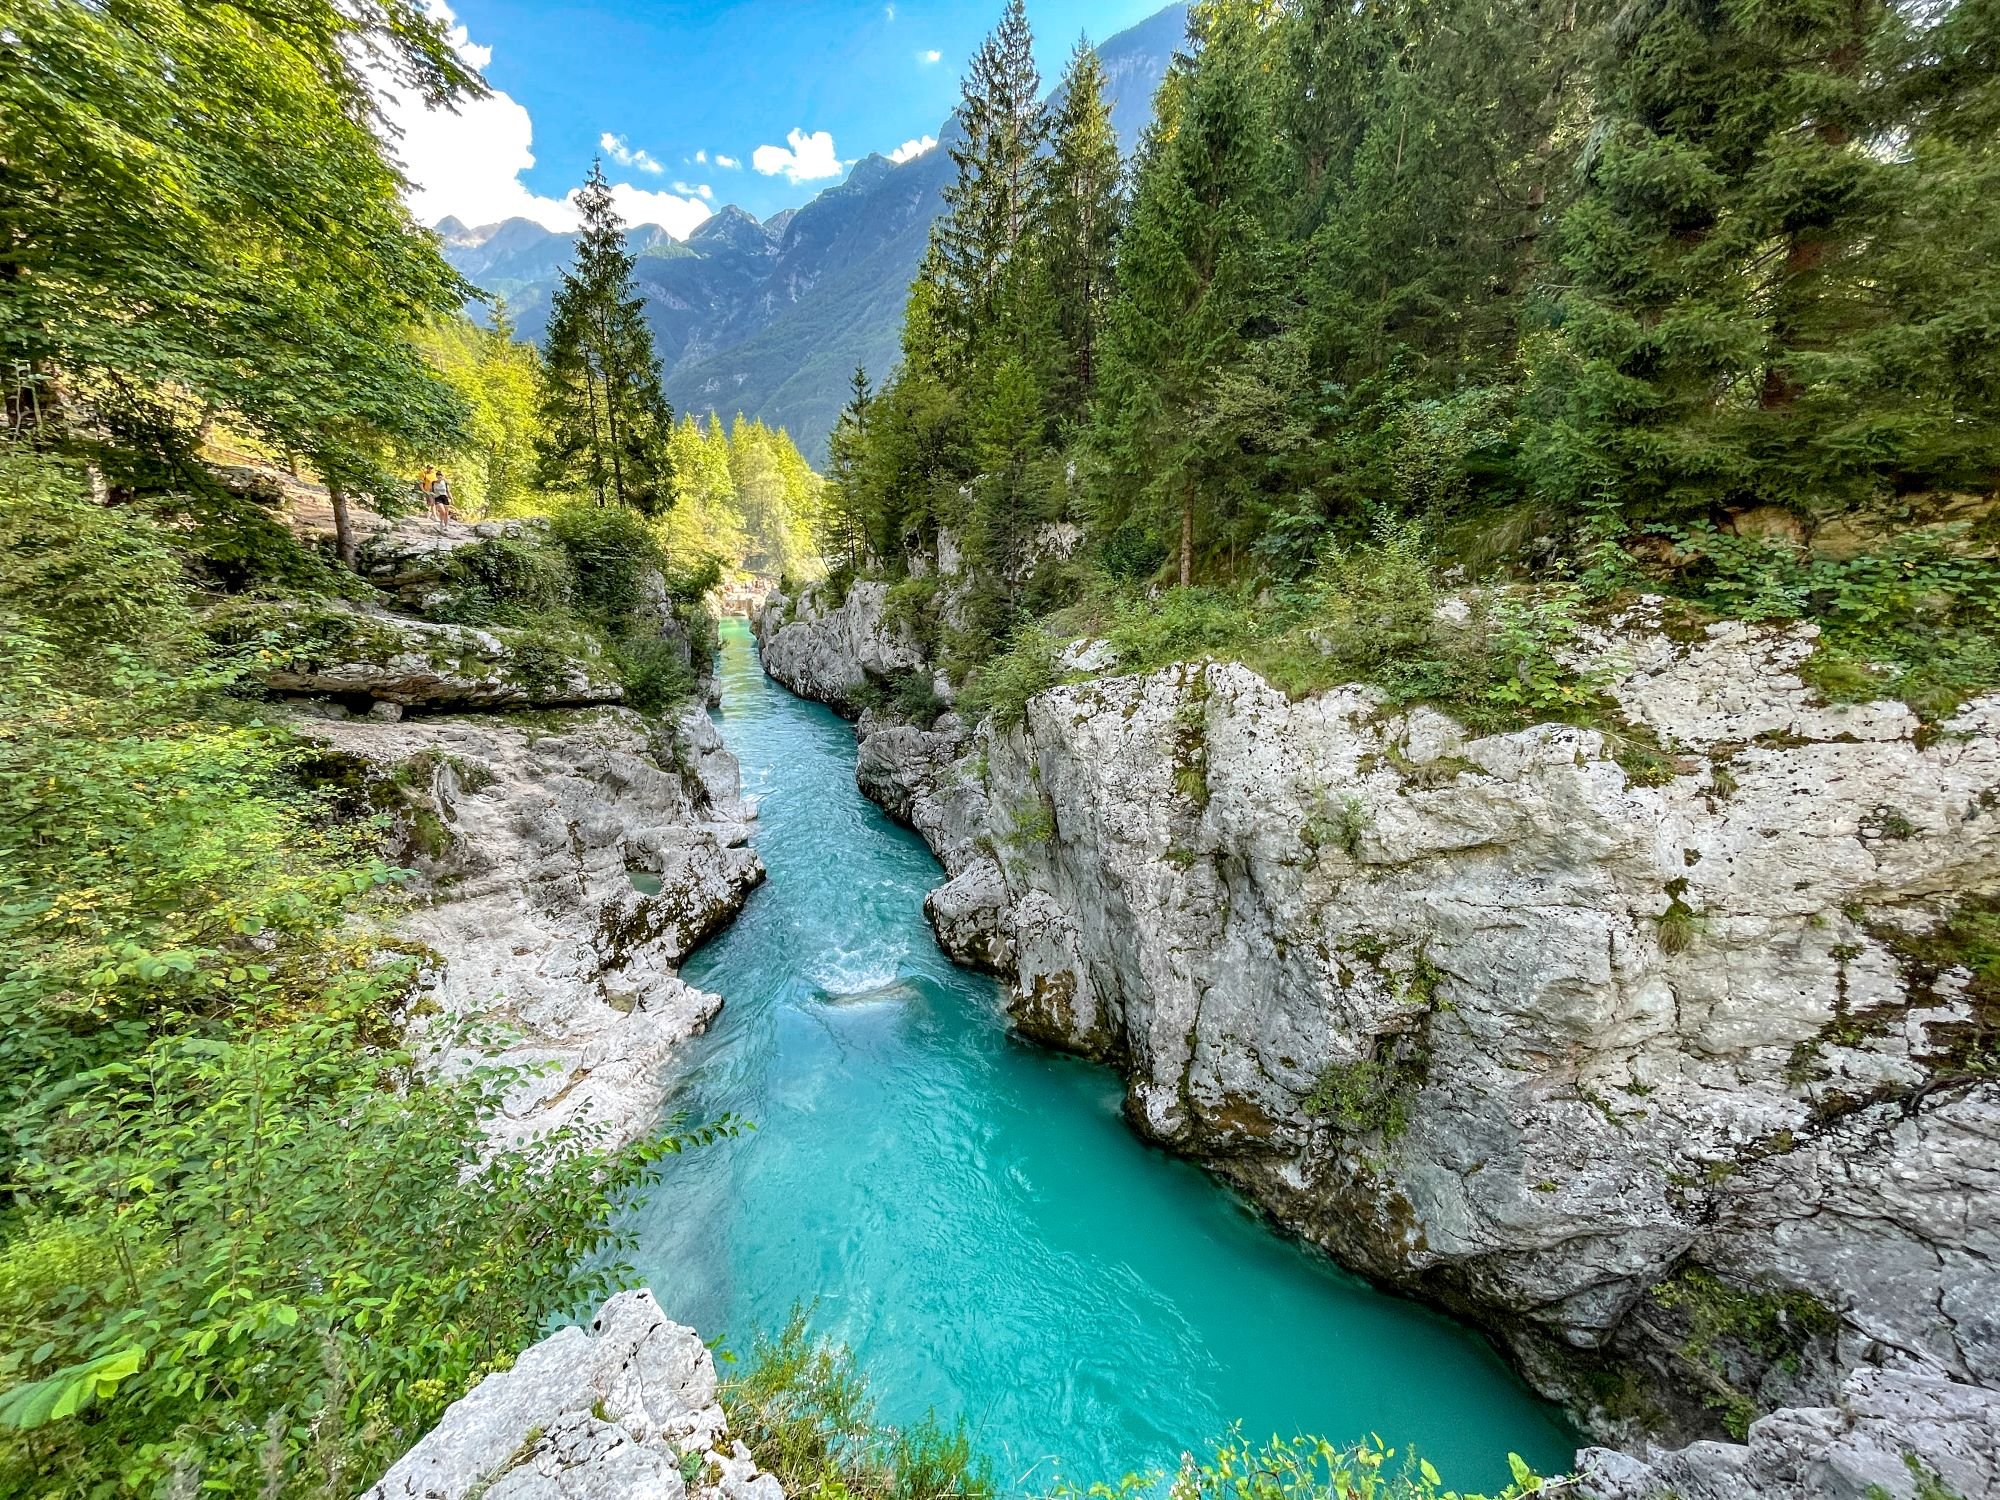 A river surrounded by rocks and trees in the Slovenian Alps, with an auto draft flowing through the picturesque landscape.